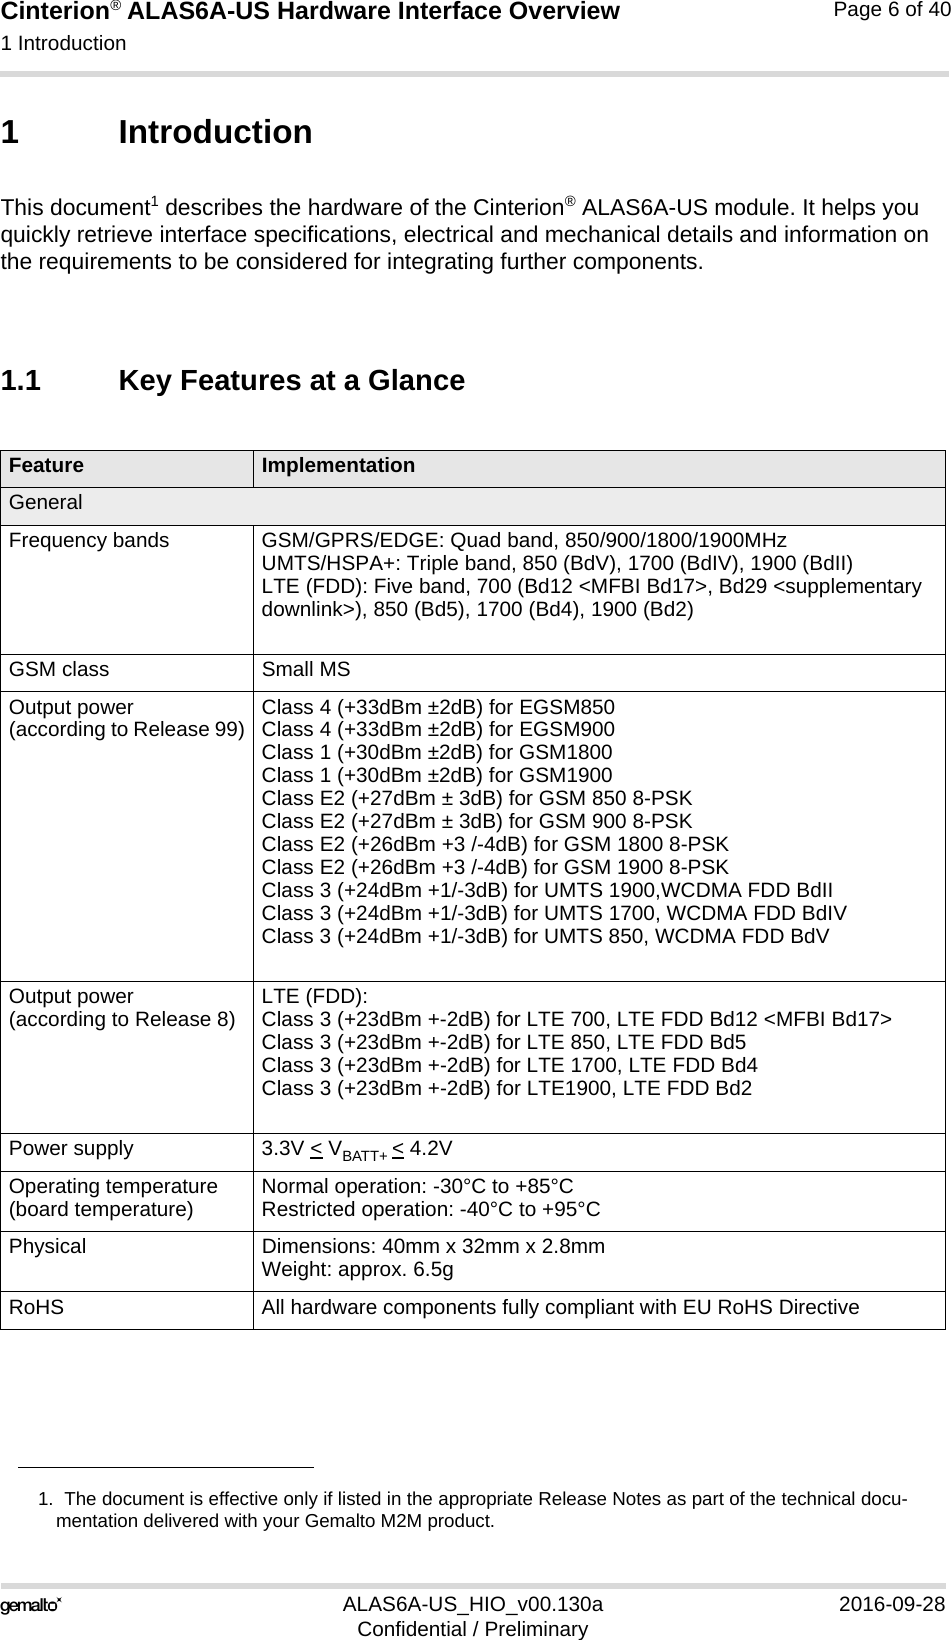 Cinterion® ALAS6A-US Hardware Interface Overview1 Introduction9ALAS6A-US_HIO_v00.130a 2016-09-28Confidential / PreliminaryPage 6 of 401 IntroductionThis document1 describes the hardware of the Cinterion® ALAS6A-US module. It helps you quickly retrieve interface specifications, electrical and mechanical details and information on the requirements to be considered for integrating further components.1.1 Key Features at a Glance1.  The document is effective only if listed in the appropriate Release Notes as part of the technical docu-mentation delivered with your Gemalto M2M product.Feature ImplementationGeneralFrequency bands GSM/GPRS/EDGE: Quad band, 850/900/1800/1900MHzUMTS/HSPA+: Triple band, 850 (BdV), 1700 (BdIV), 1900 (BdII)LTE (FDD): Five band, 700 (Bd12 &lt;MFBI Bd17&gt;, Bd29 &lt;supplementary downlink&gt;), 850 (Bd5), 1700 (Bd4), 1900 (Bd2)GSM class Small MSOutput power (according to Release 99) Class 4 (+33dBm ±2dB) for EGSM850Class 4 (+33dBm ±2dB) for EGSM900Class 1 (+30dBm ±2dB) for GSM1800Class 1 (+30dBm ±2dB) for GSM1900Class E2 (+27dBm ± 3dB) for GSM 850 8-PSKClass E2 (+27dBm ± 3dB) for GSM 900 8-PSKClass E2 (+26dBm +3 /-4dB) for GSM 1800 8-PSKClass E2 (+26dBm +3 /-4dB) for GSM 1900 8-PSKClass 3 (+24dBm +1/-3dB) for UMTS 1900,WCDMA FDD BdIIClass 3 (+24dBm +1/-3dB) for UMTS 1700, WCDMA FDD BdIVClass 3 (+24dBm +1/-3dB) for UMTS 850, WCDMA FDD BdVOutput power (according to Release 8) LTE (FDD):Class 3 (+23dBm +-2dB) for LTE 700, LTE FDD Bd12 &lt;MFBI Bd17&gt;Class 3 (+23dBm +-2dB) for LTE 850, LTE FDD Bd5Class 3 (+23dBm +-2dB) for LTE 1700, LTE FDD Bd4Class 3 (+23dBm +-2dB) for LTE1900, LTE FDD Bd2Power supply 3.3V &lt; VBATT+ &lt; 4.2VOperating temperature (board temperature) Normal operation: -30°C to +85°CRestricted operation: -40°C to +95°CPhysical Dimensions: 40mm x 32mm x 2.8mmWeight: approx. 6.5gRoHS All hardware components fully compliant with EU RoHS Directive